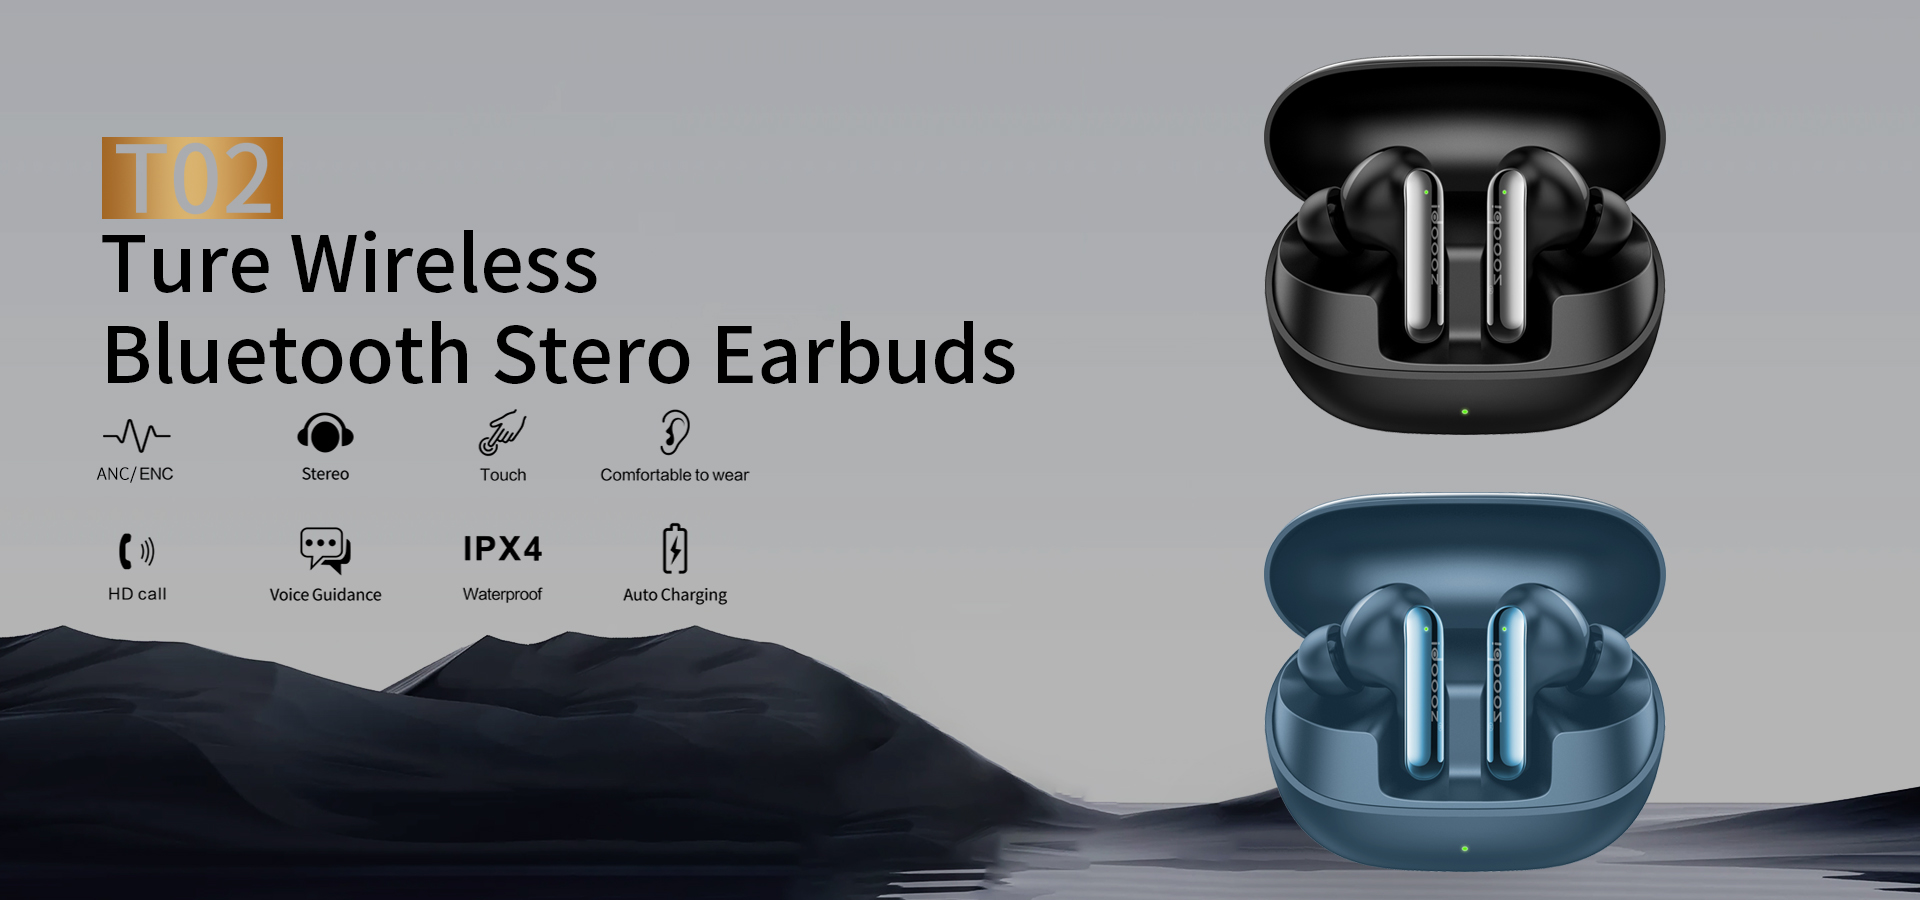 Ture Wireless Bluetooth Stero Earbuds